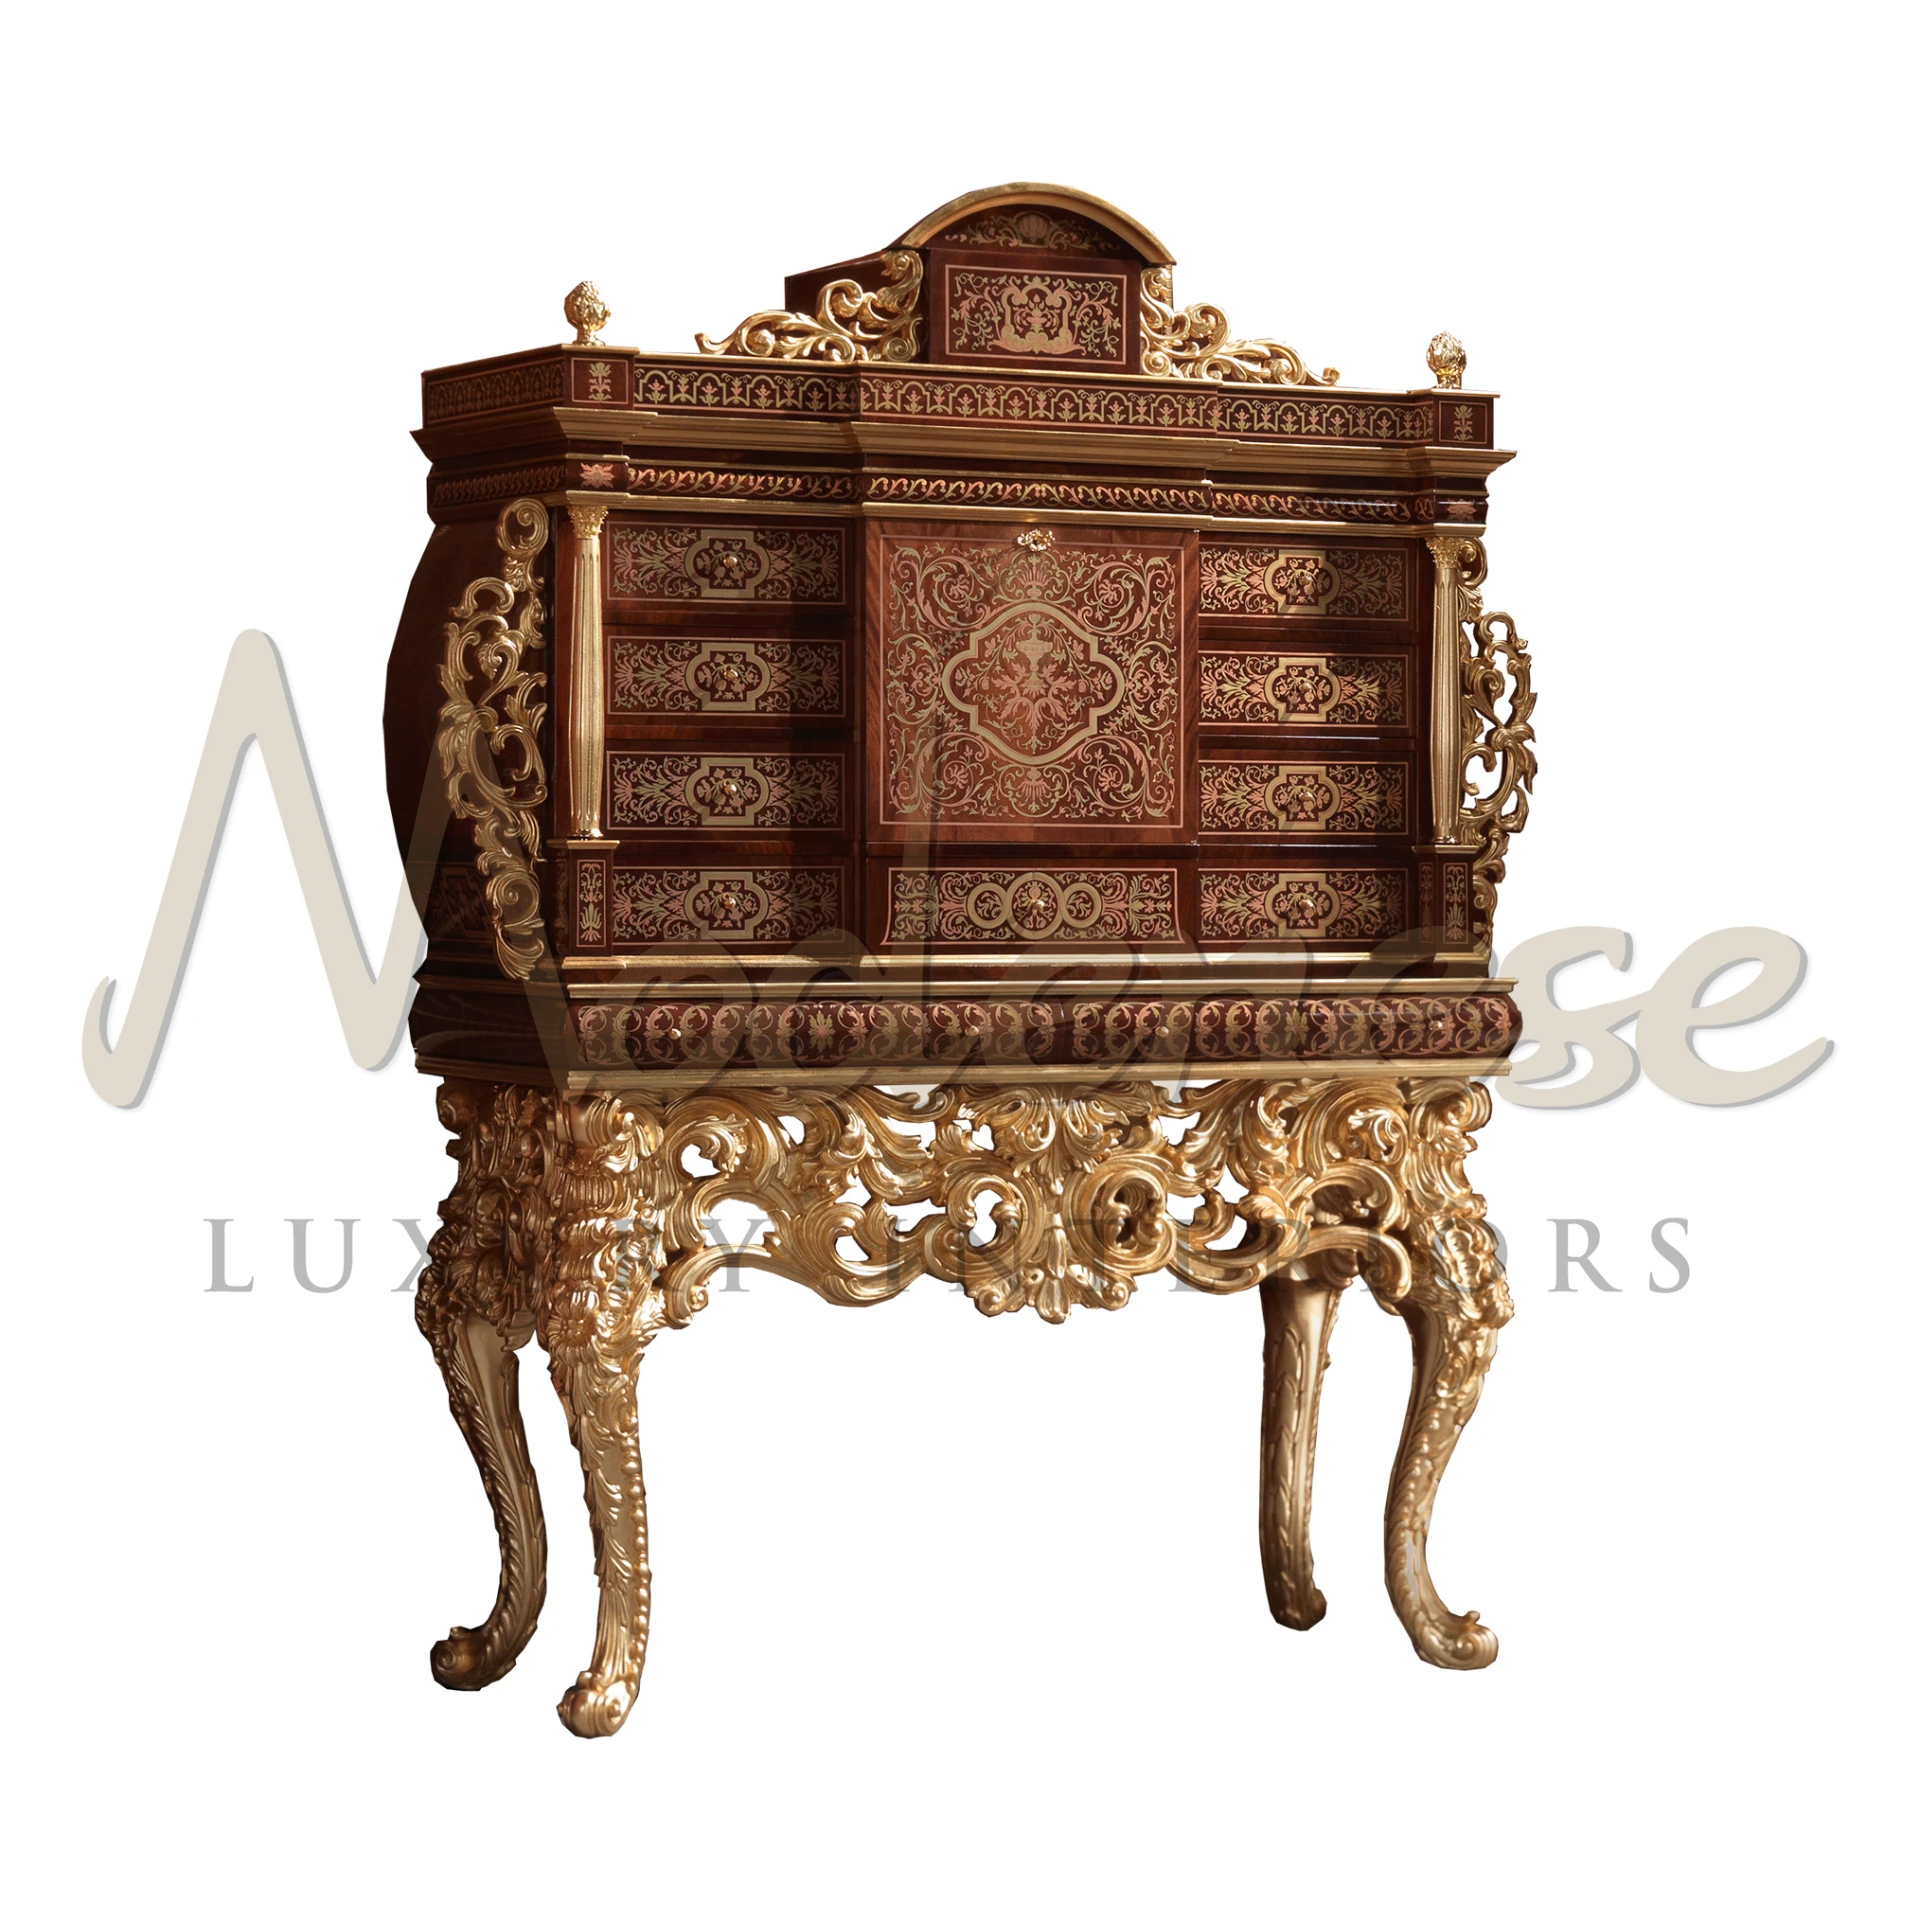 Modenese Furniture presents a solid wood, gold-leaf adorned cigar cabinet. Features 9 drawers in classic walnut finish, embodying pure luxury.